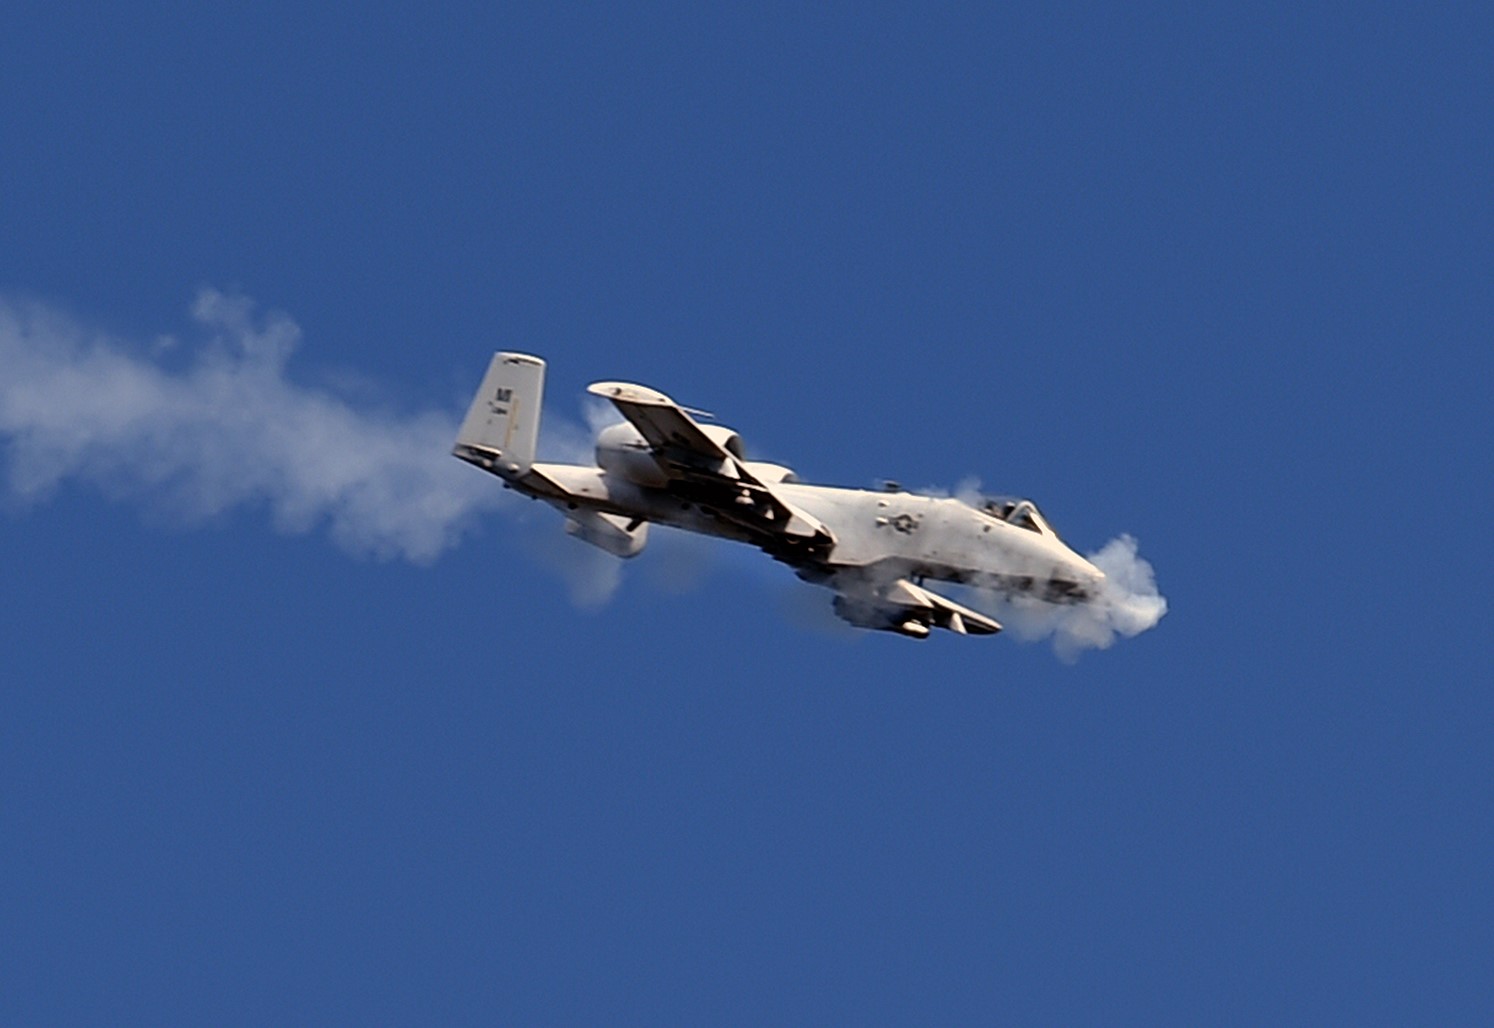 That Time When Two A-10 Pilots Destroyed 23 Tanks In A Single Day